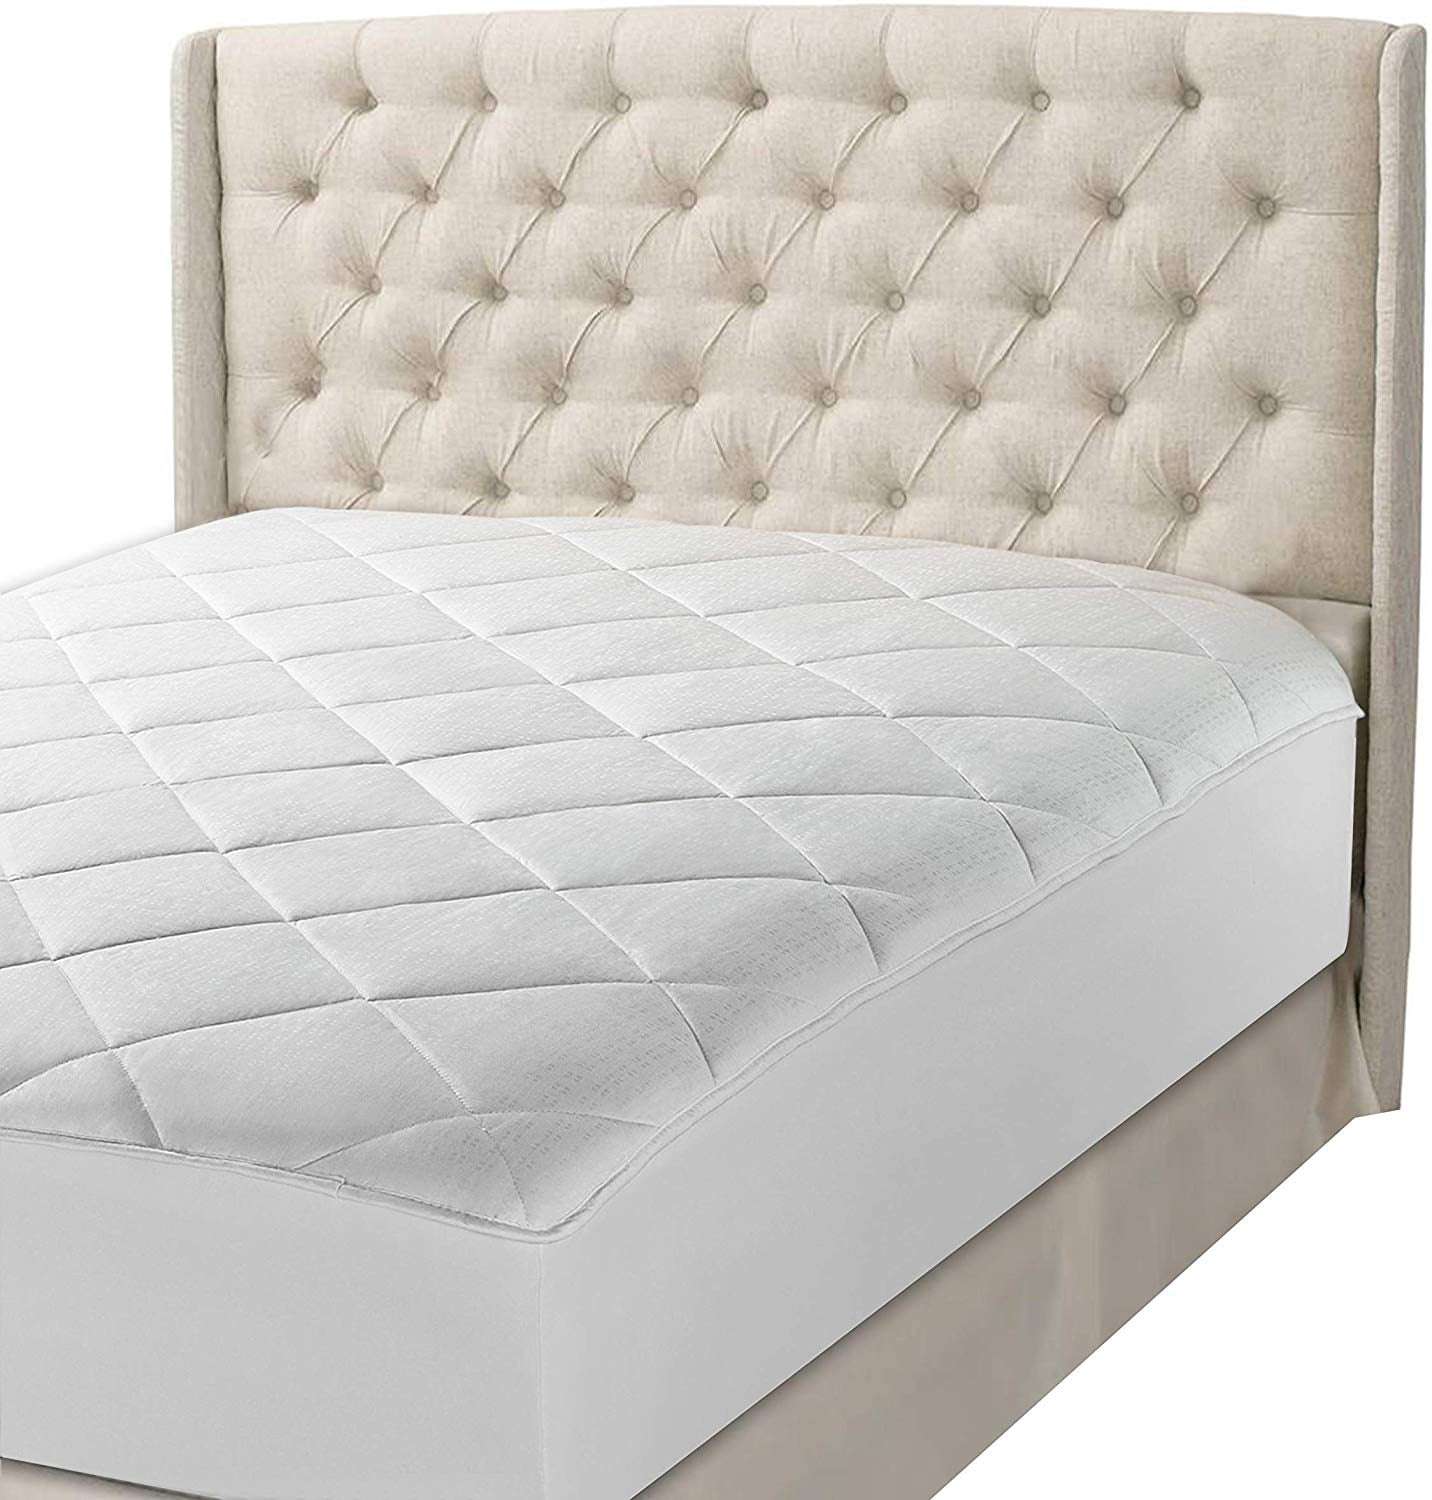 Luxury 100% Cotton Quilted Anti Allergenic Mattress Cover 200 Thread Count 